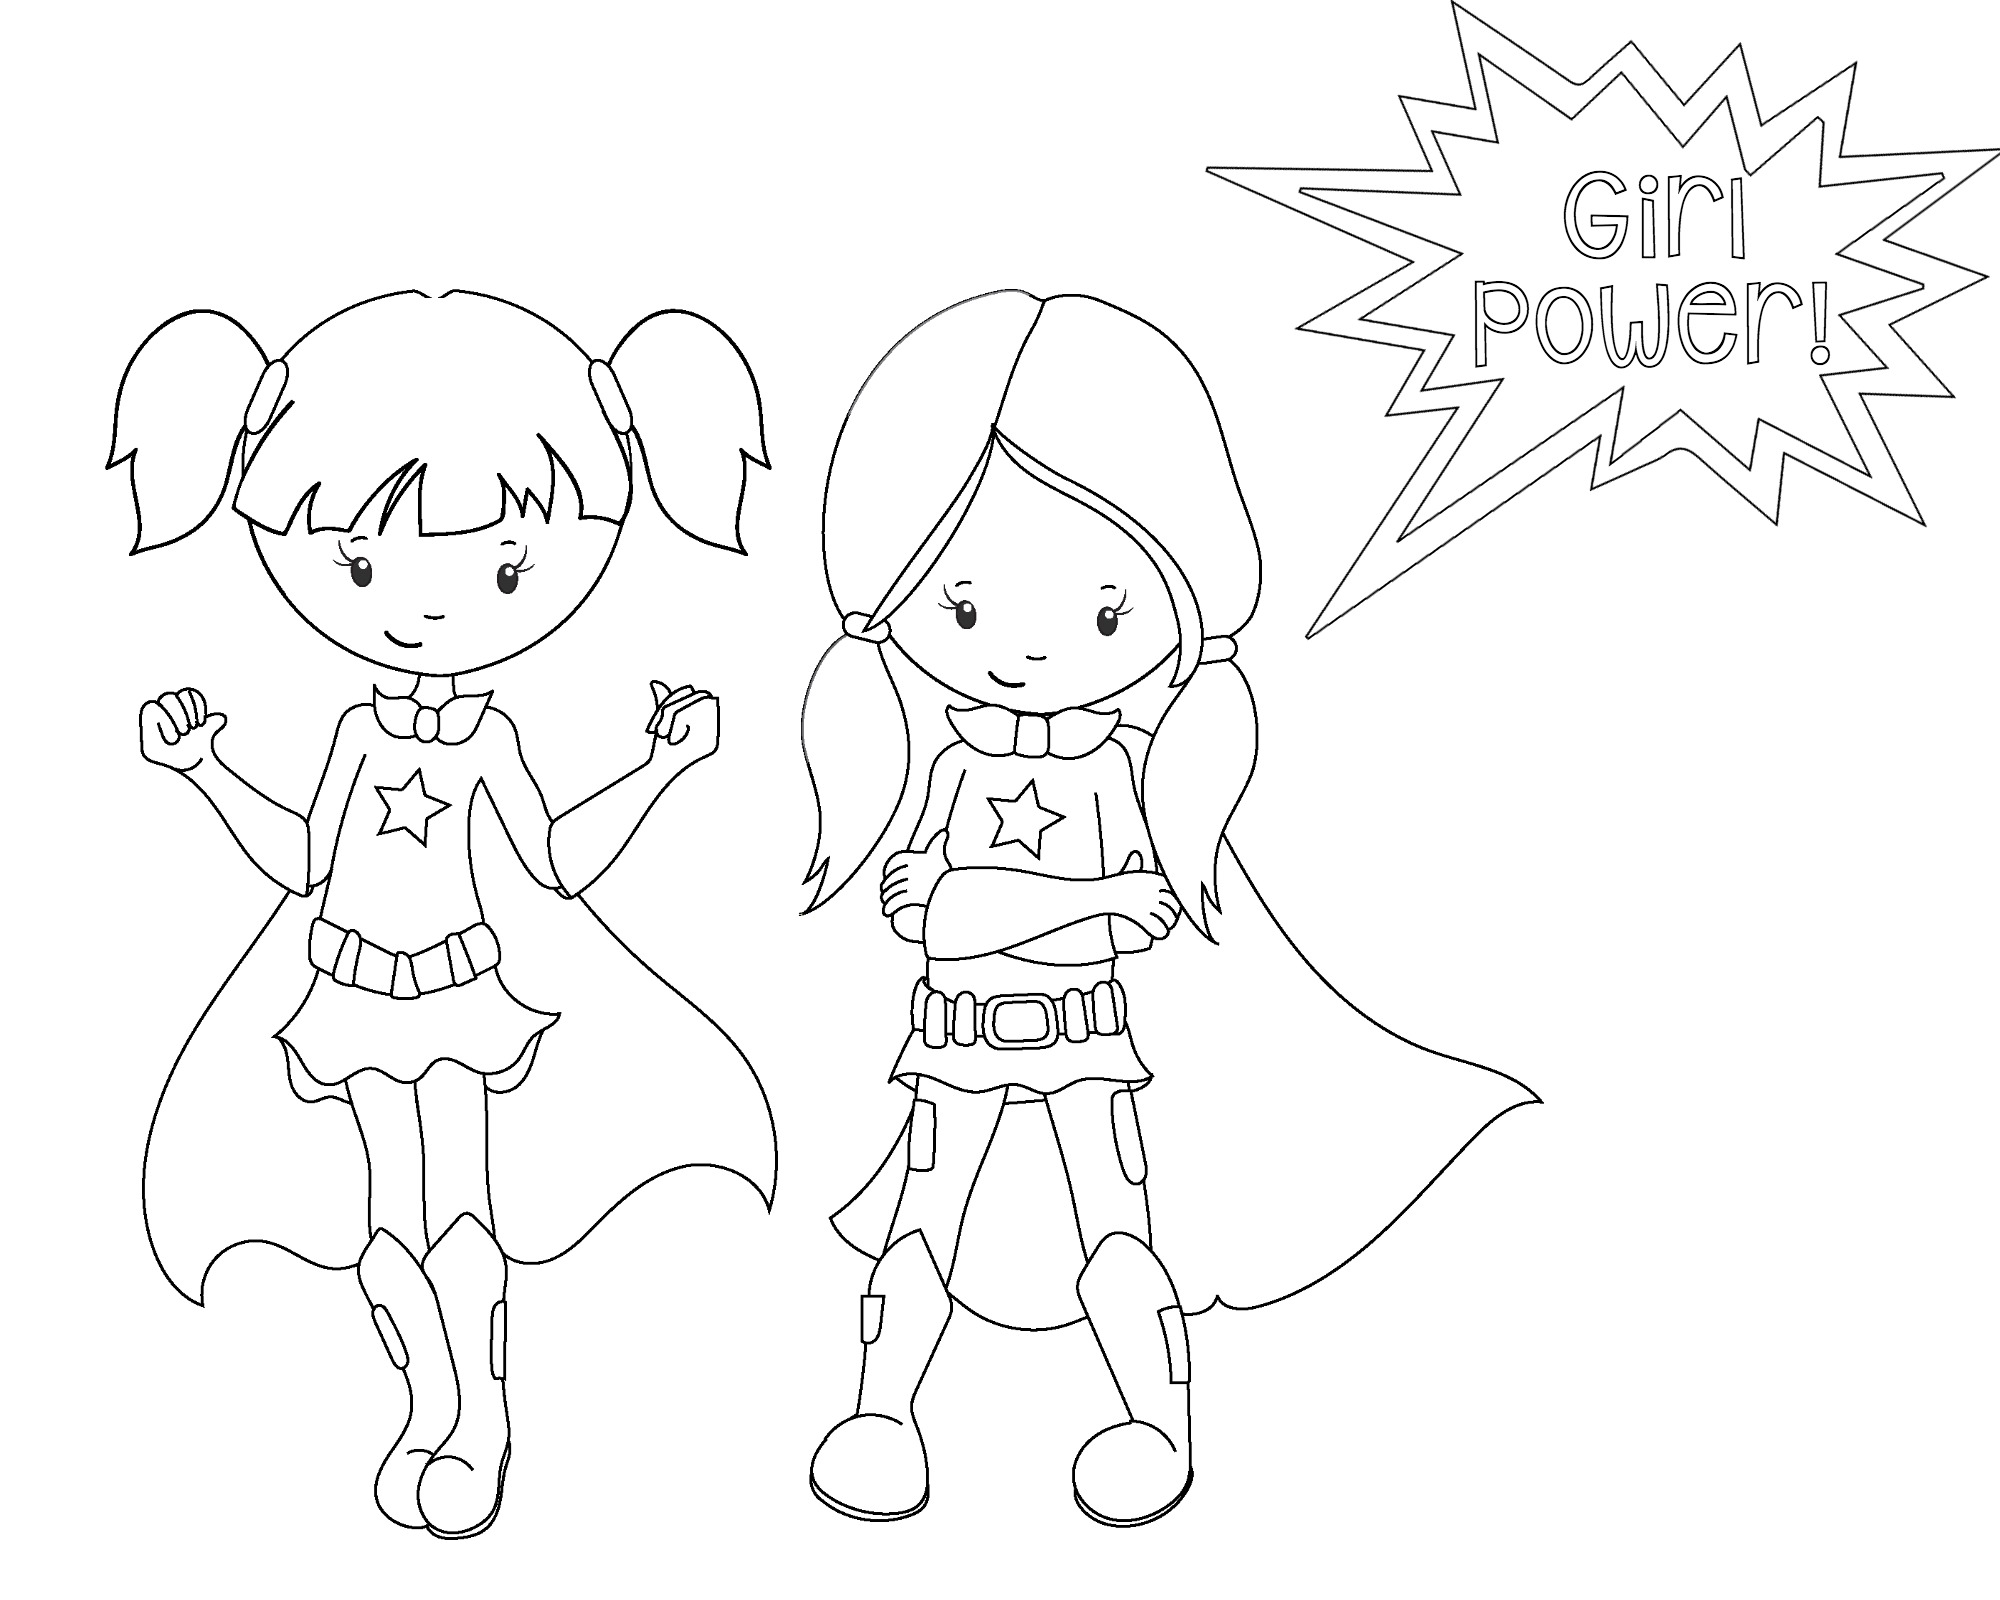 Download Superhero Coloring Pages Best Coloring Pages For Kids